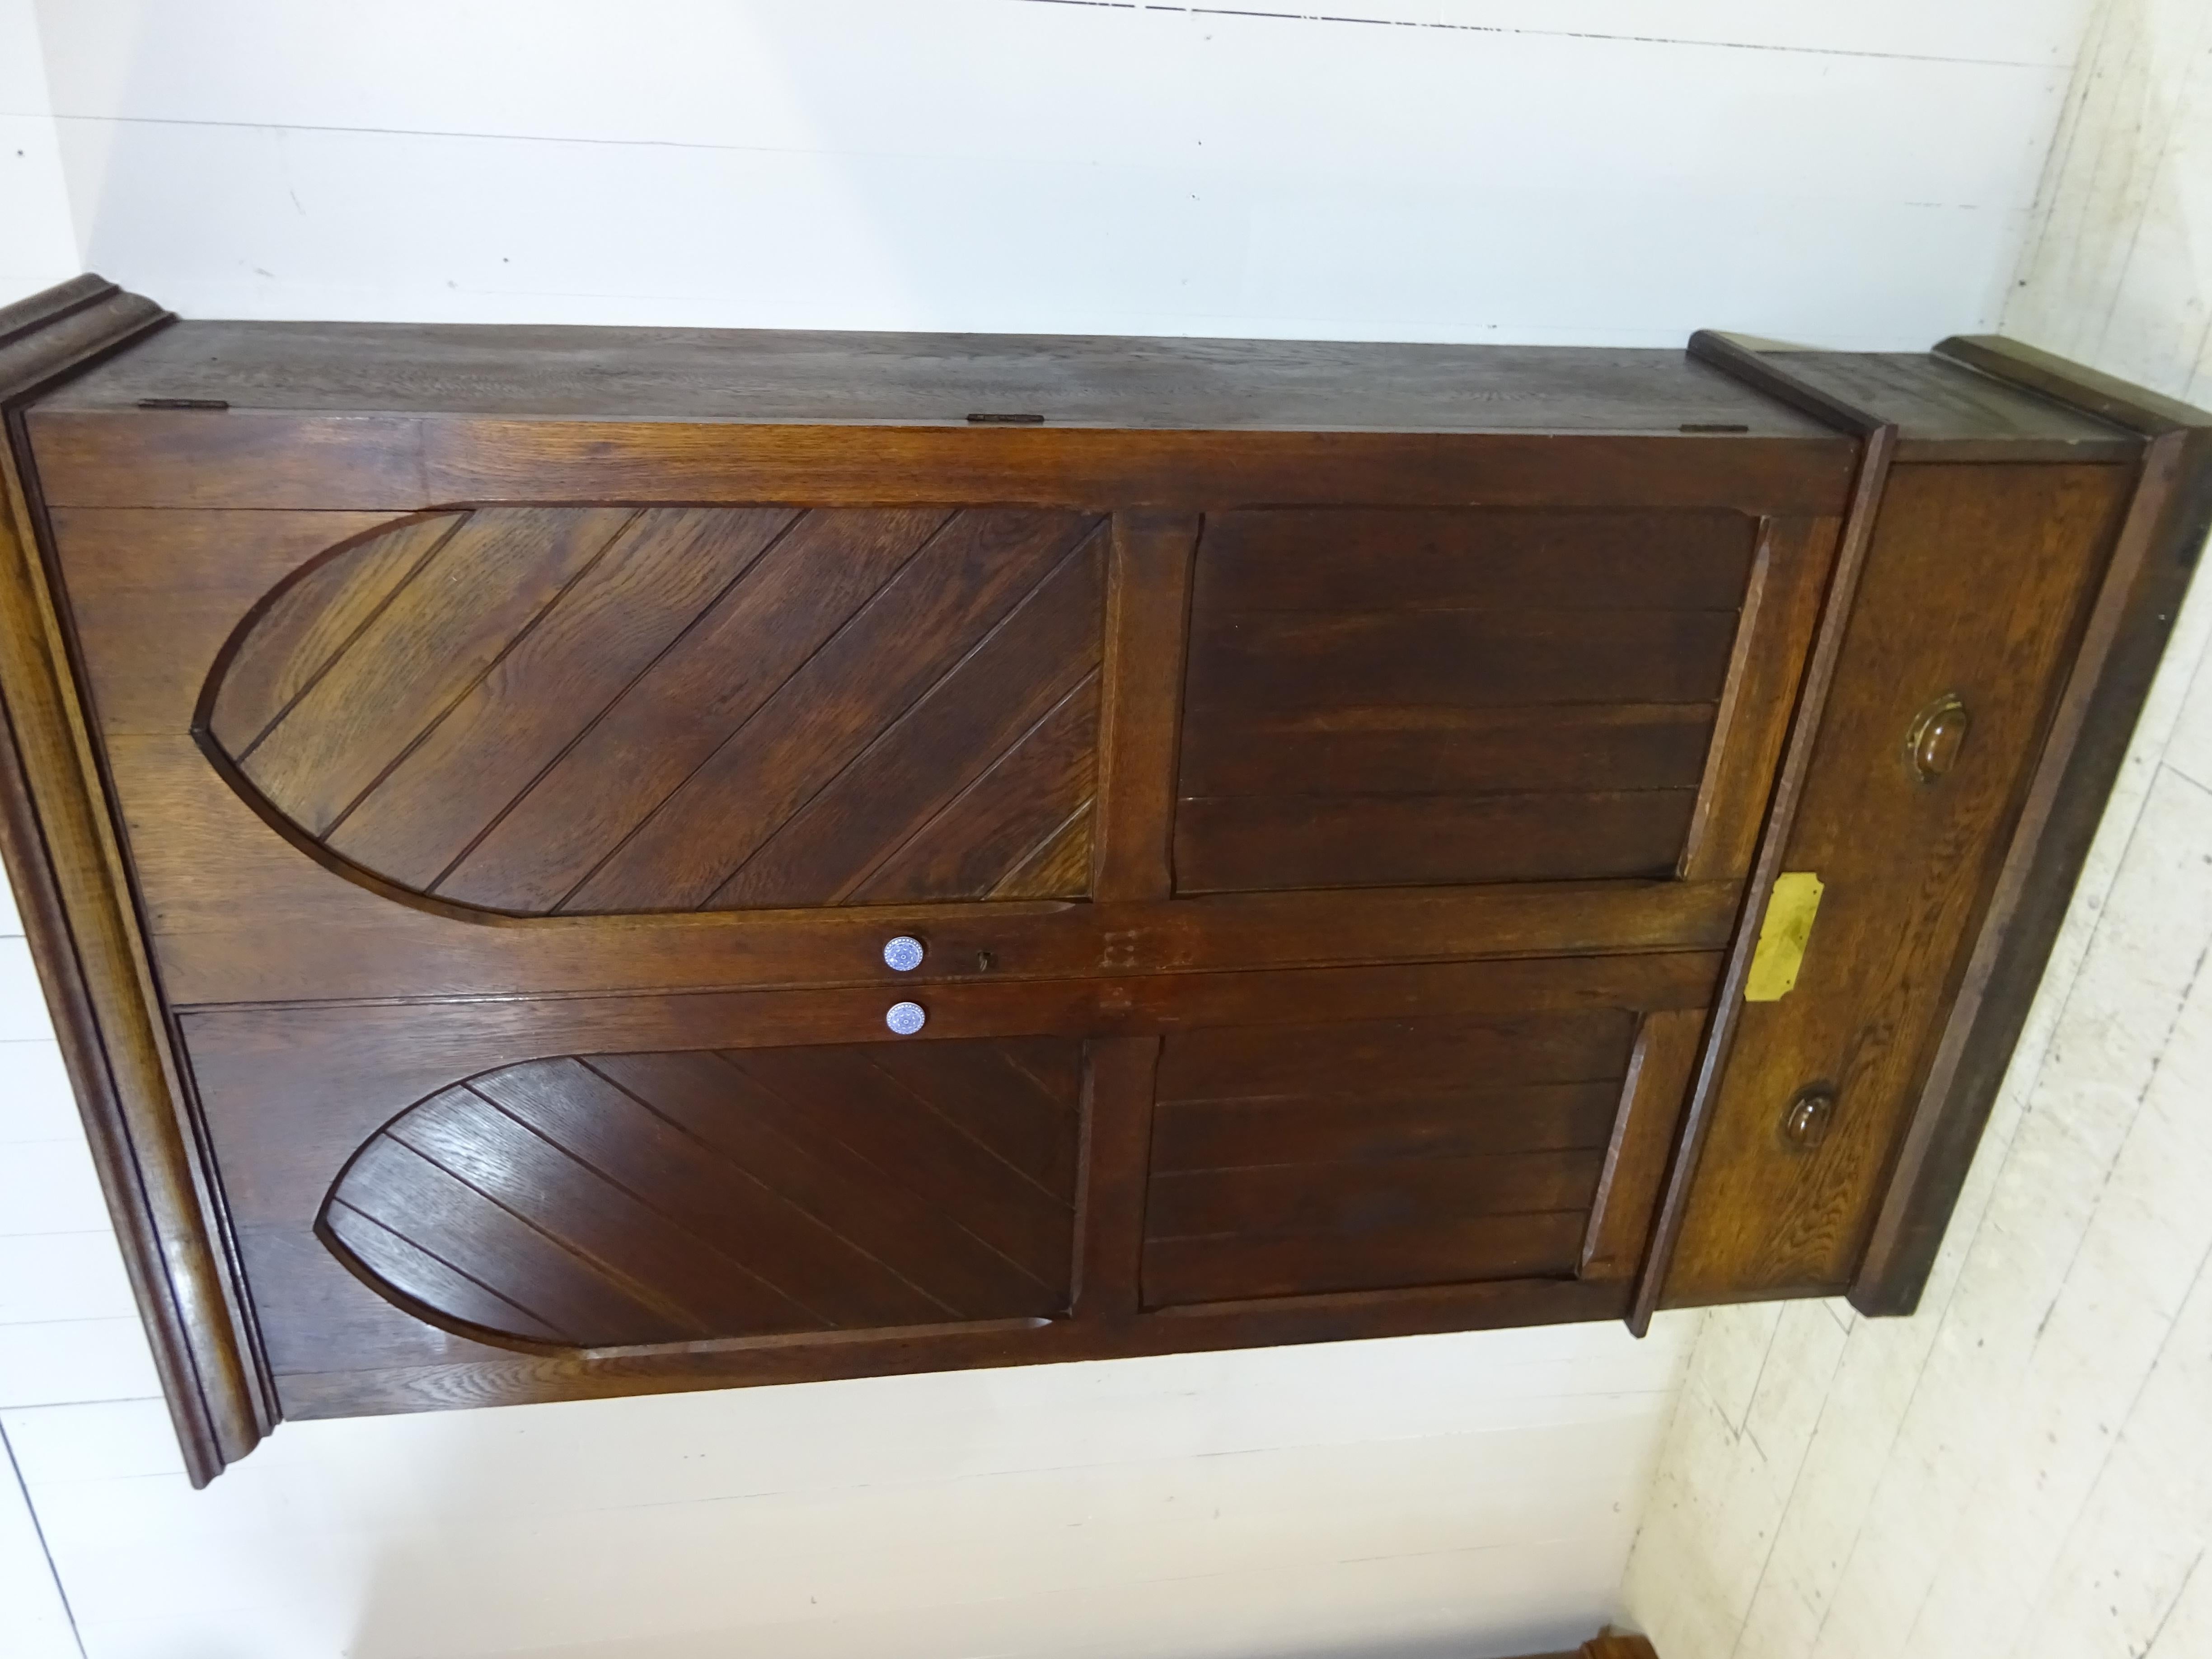 An outstanding find by the team at the Eclectic Trading Company. This piece is an original hallway cupboard sourced from a church manse in the Scottish borders. A  lovely looking cupboard that was handmade for the property. The cupboard was used in